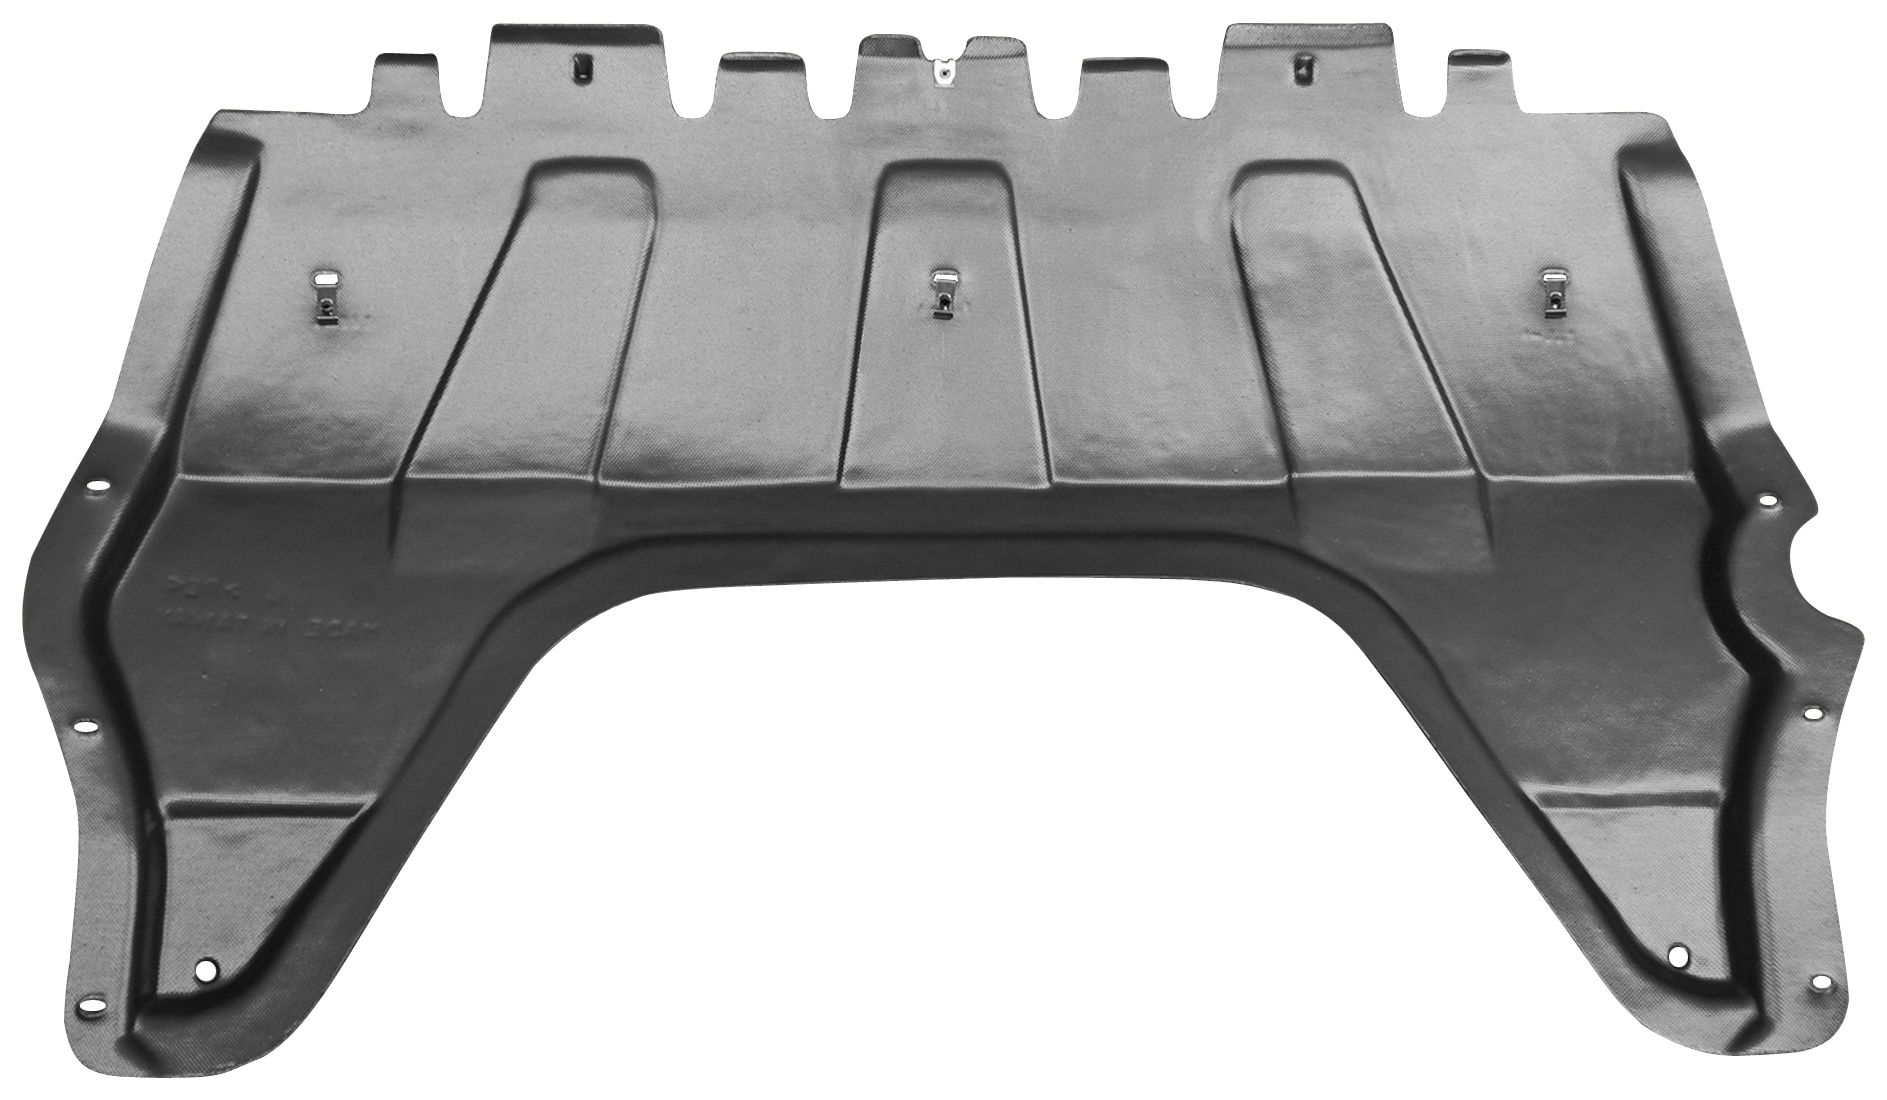 Aftermarket UNDER ENGINE COVERS for VOLKSWAGEN - TIGUAN, TIGUAN,09-17,Lower engine cover